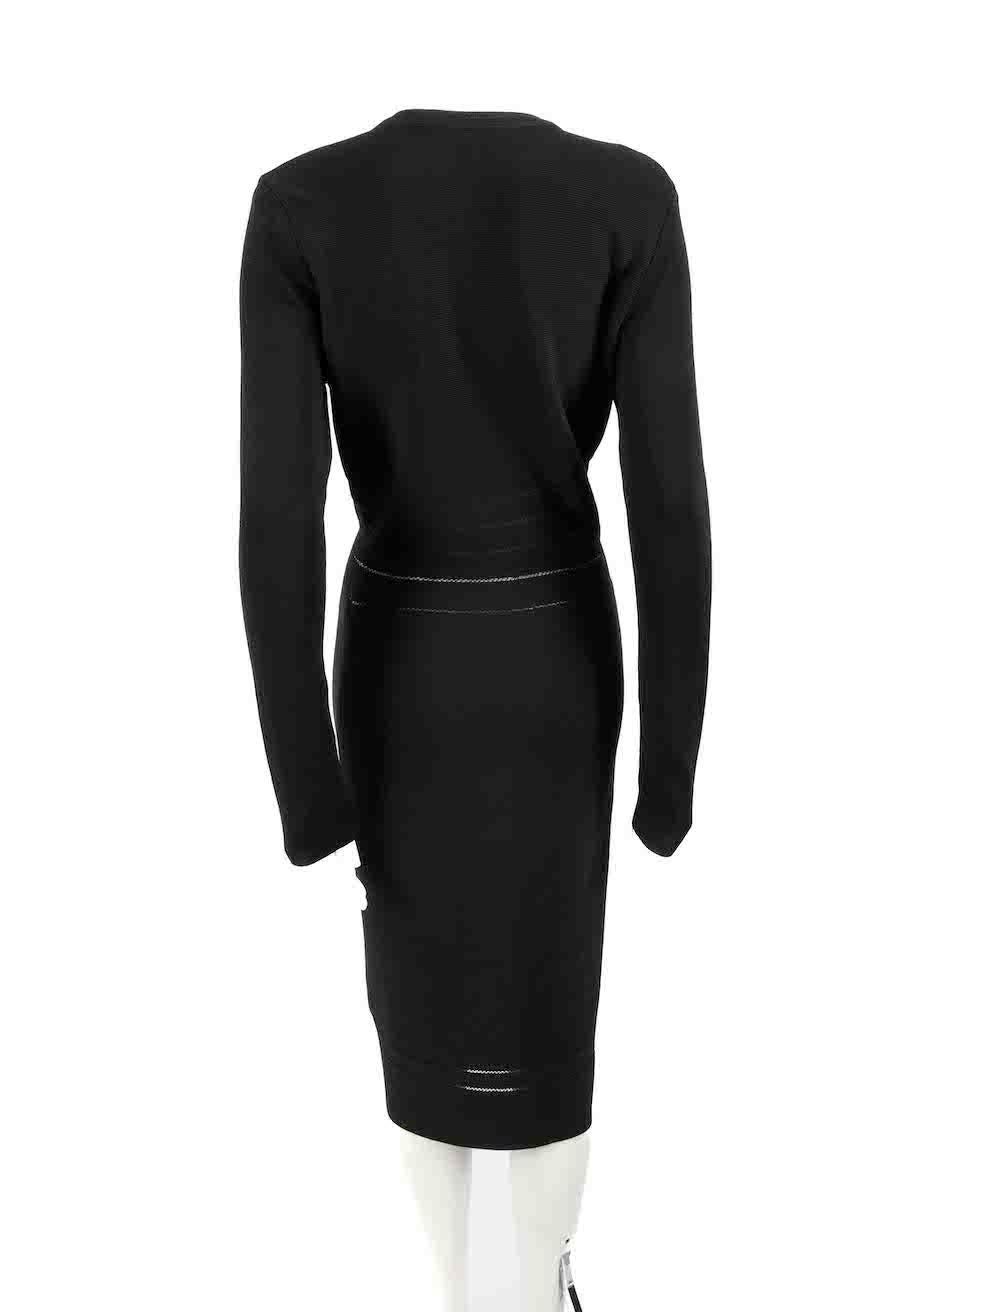 Herve Leger Black Front Zip Midi Knit Dress Size M In Excellent Condition For Sale In London, GB